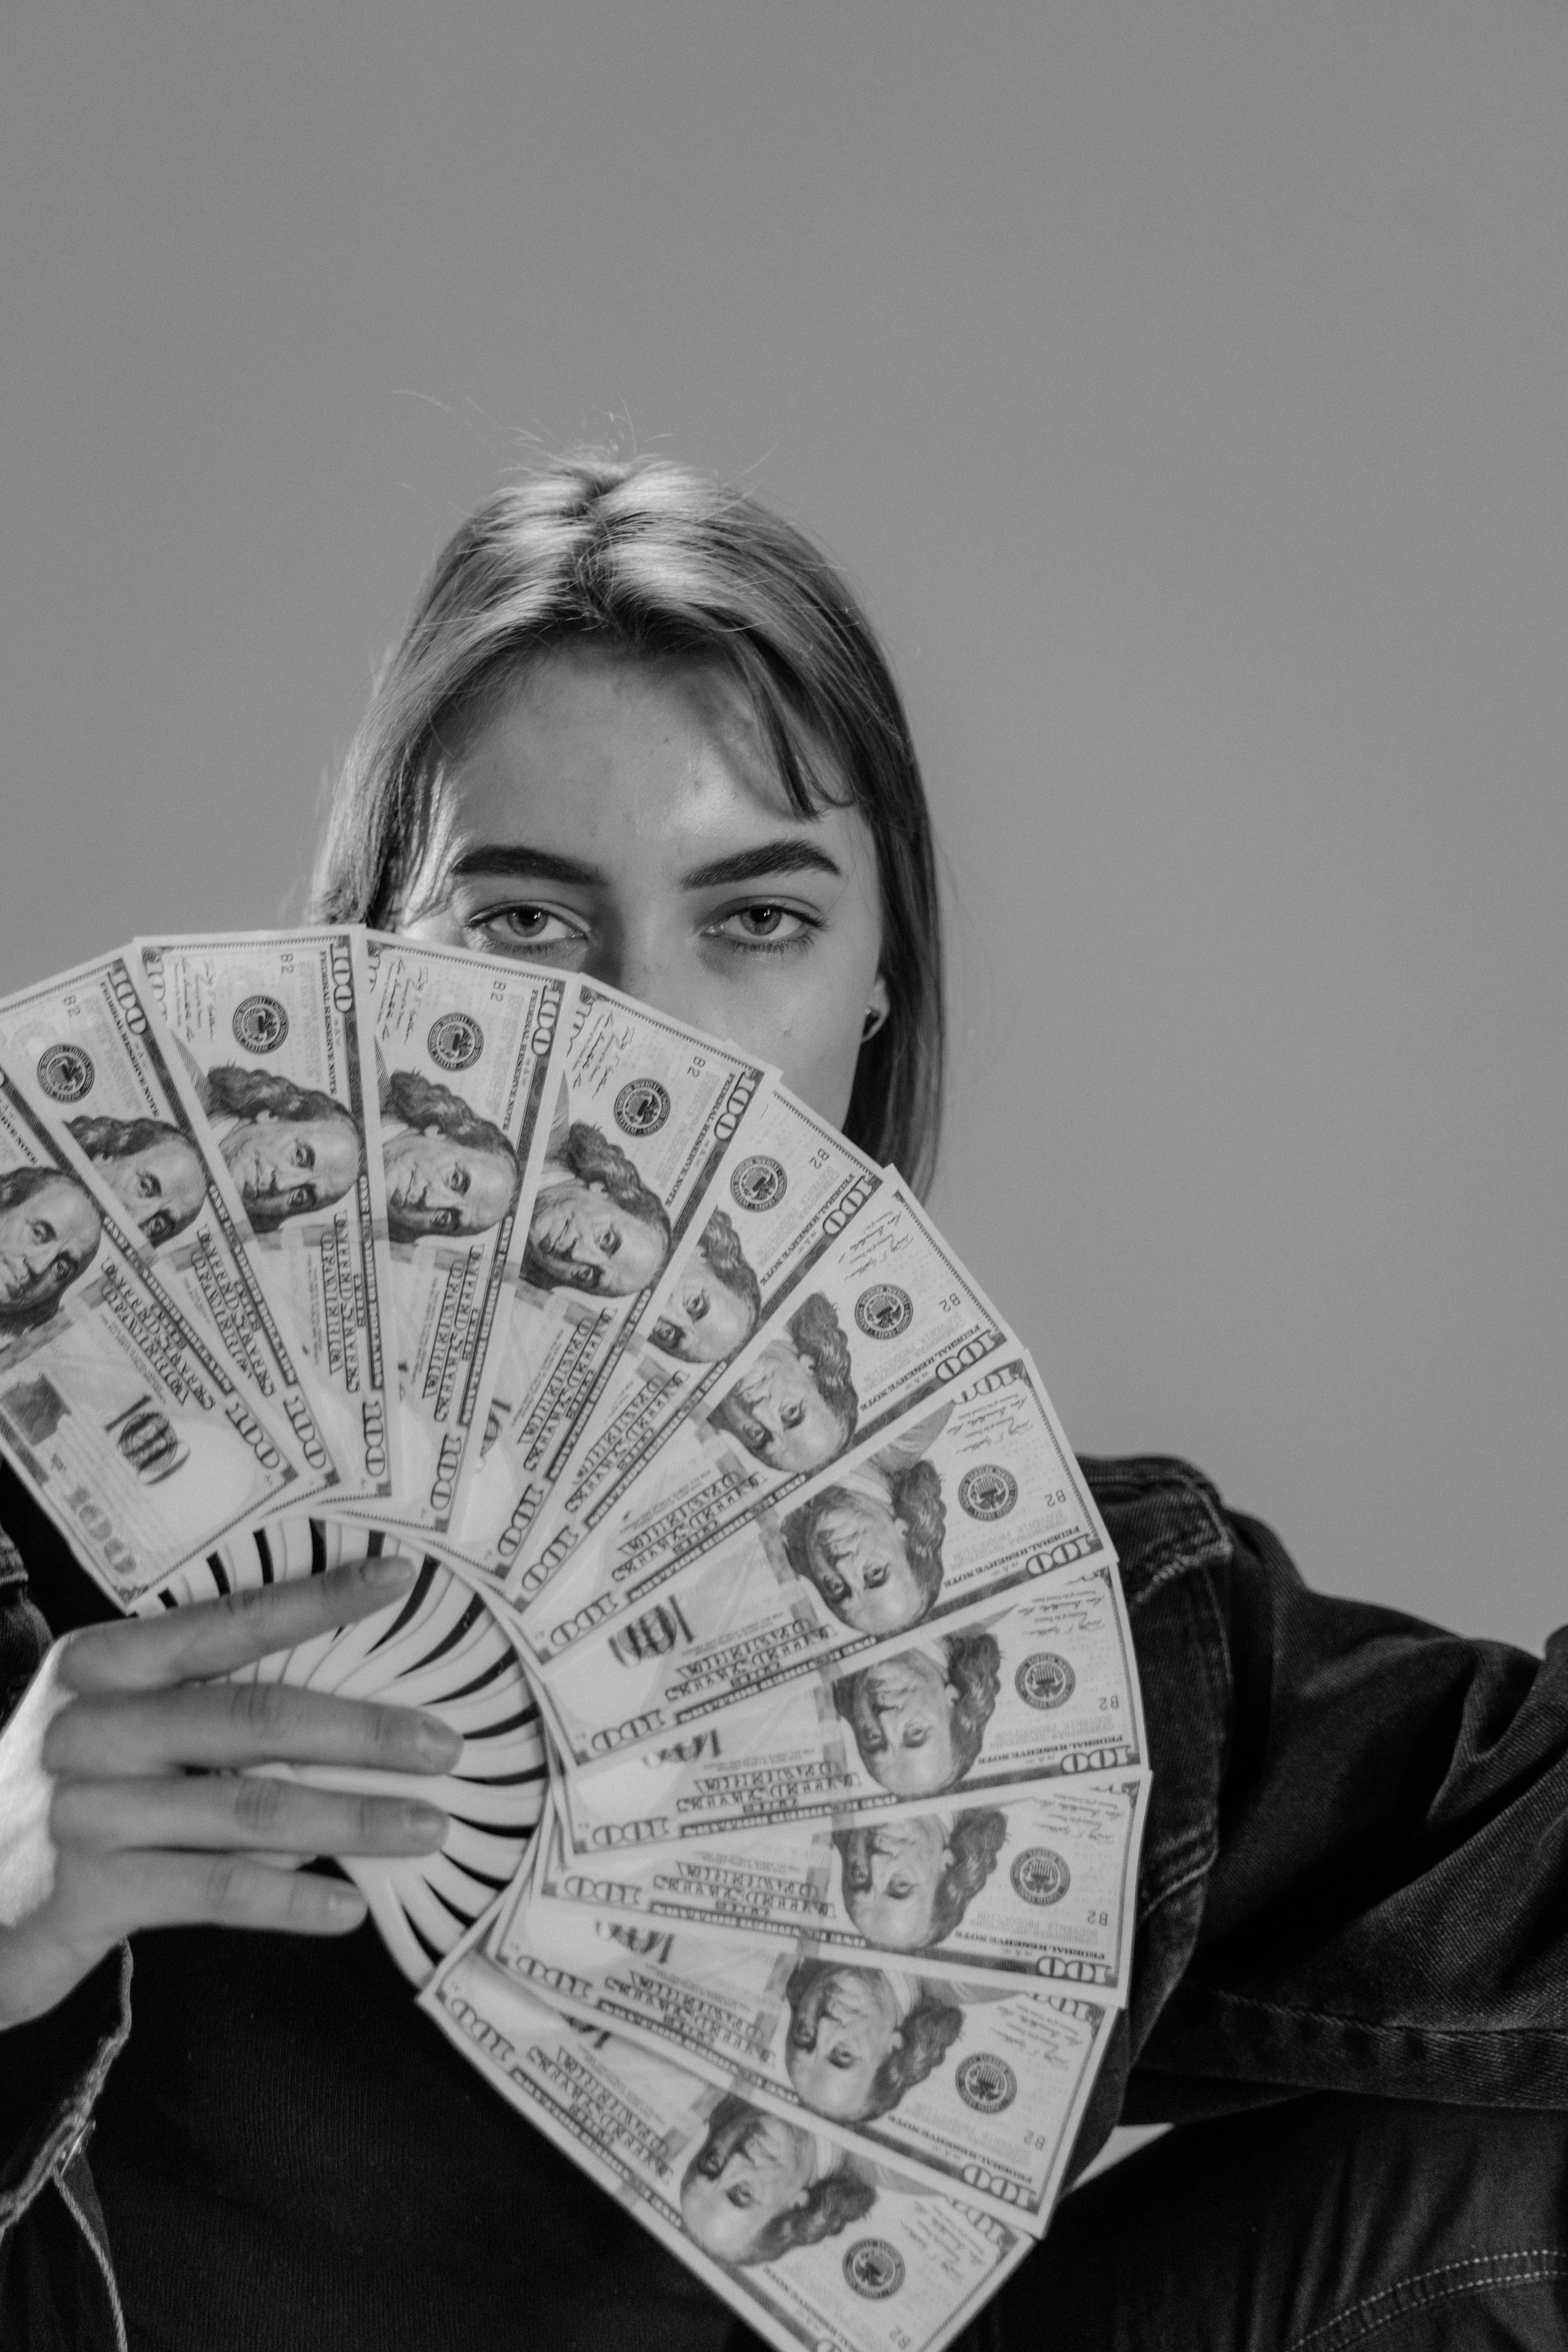 A woman fanning herself with money | Source: Pexels